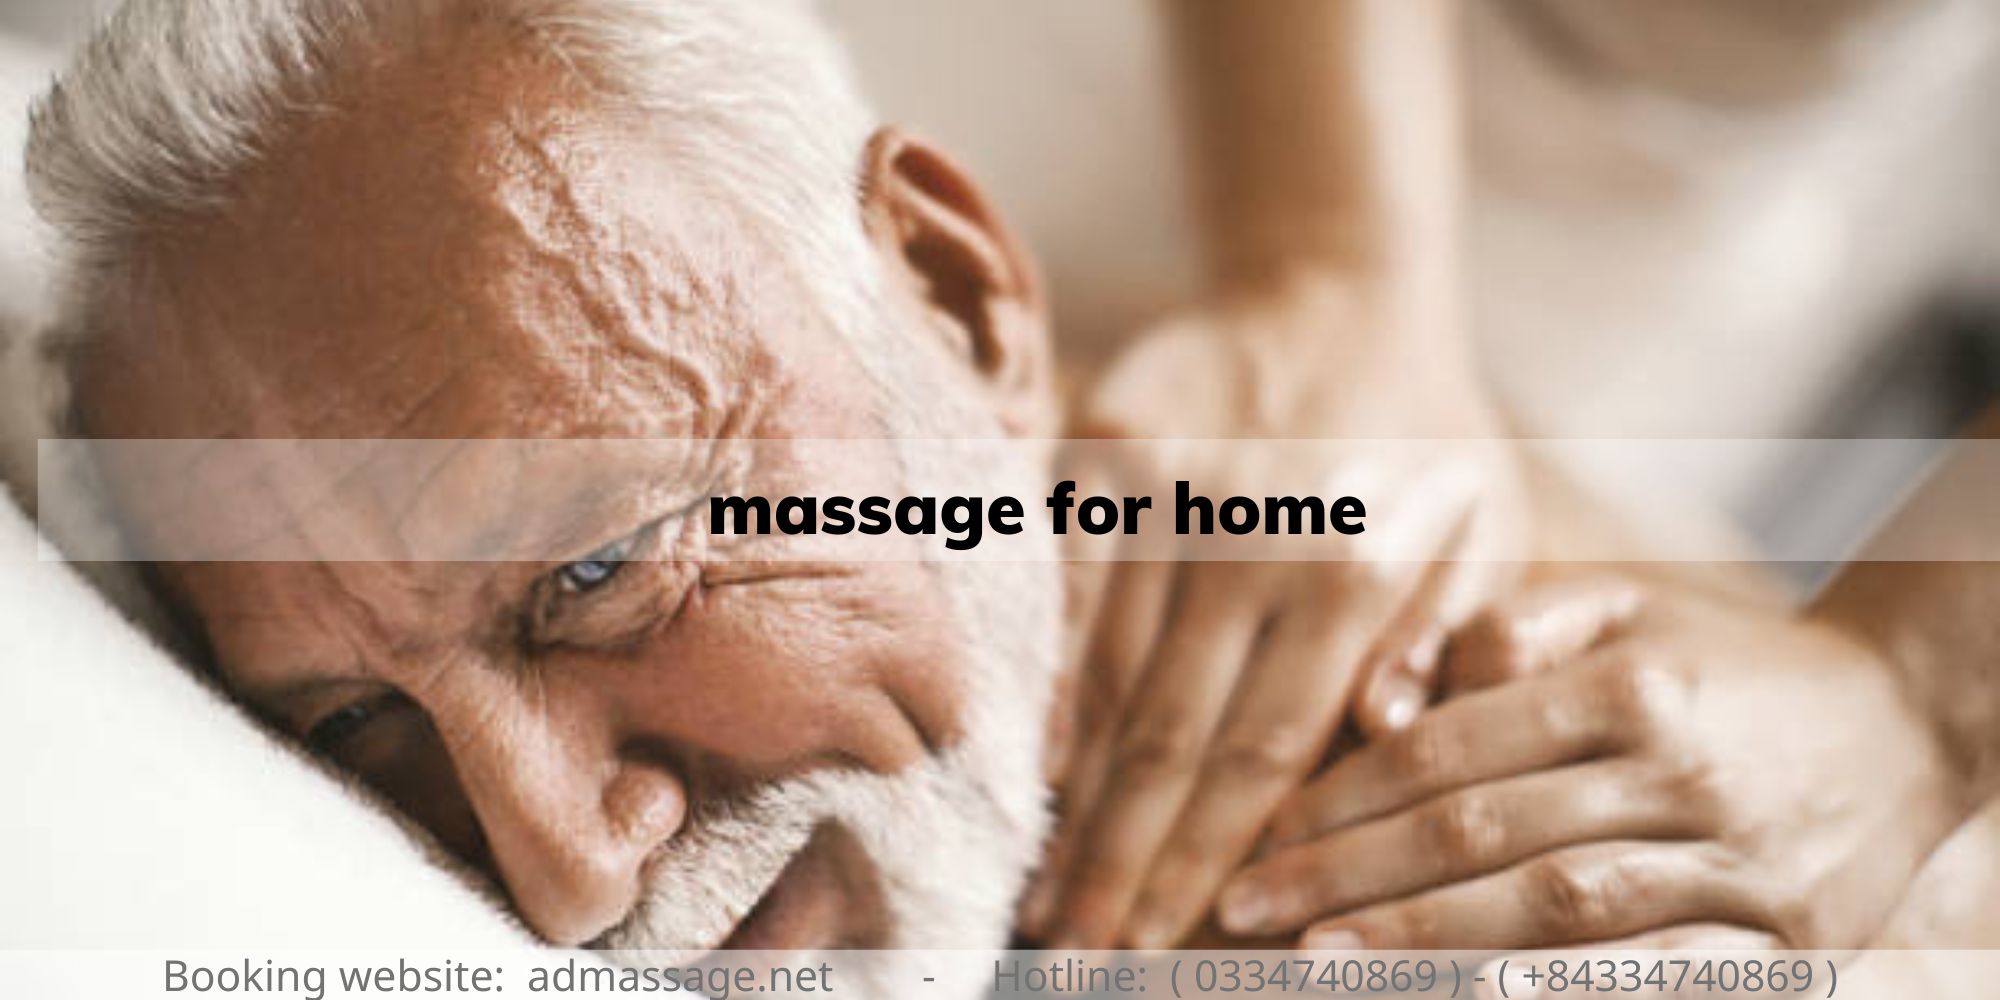 massage for home